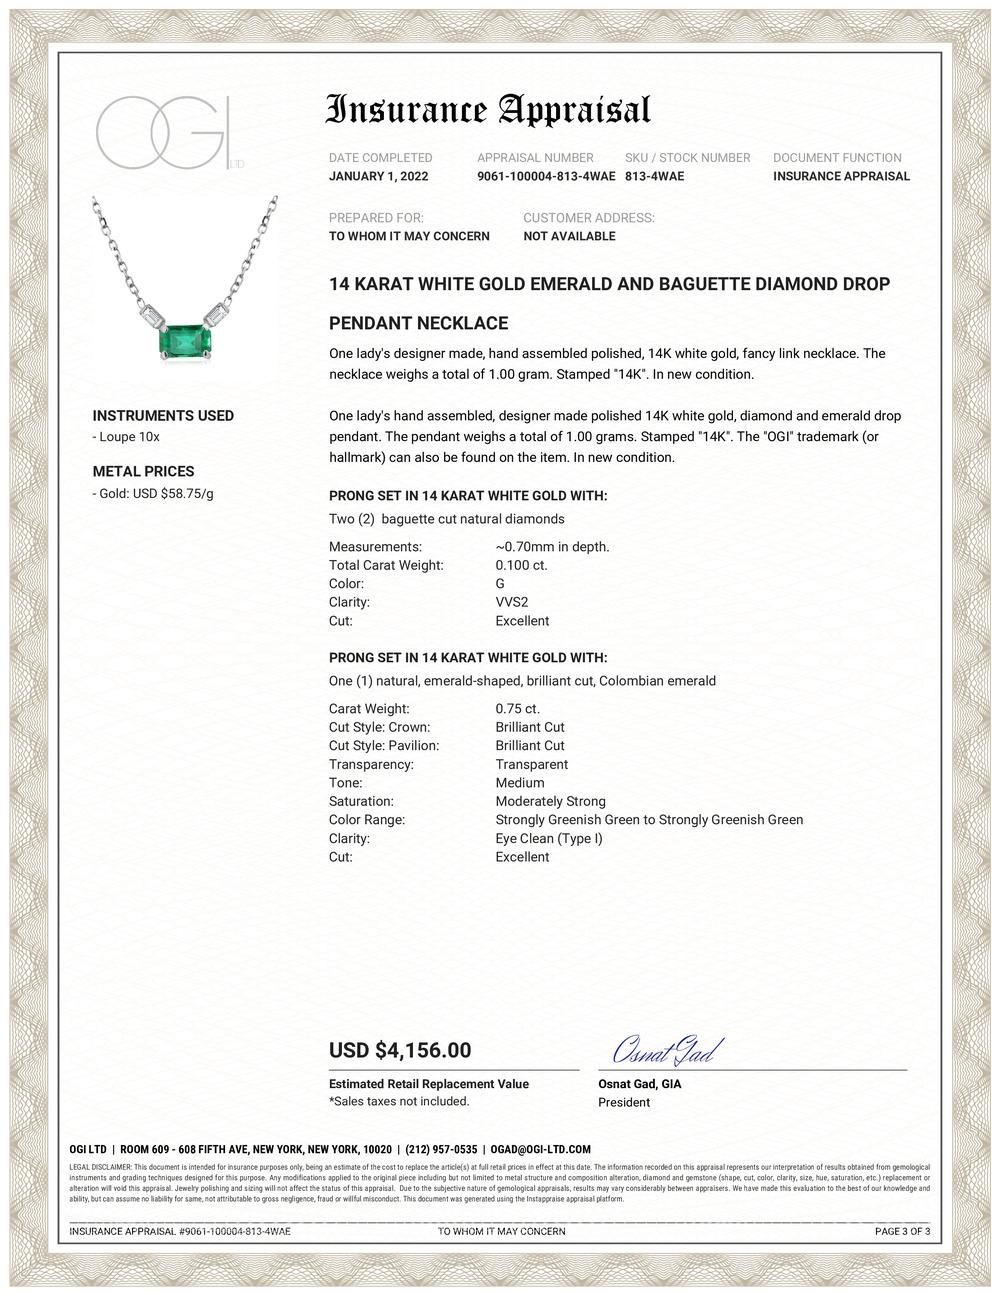 Fourteen karats white gold necklace pendant 
Necklace measuring 16 inches long
One emerald cut Colombia emeralds weighing 0.75 carats
Two baguette shaped diamonds weighing 0.10 carats
Cable chain necklace with a lobster spring clasp
New